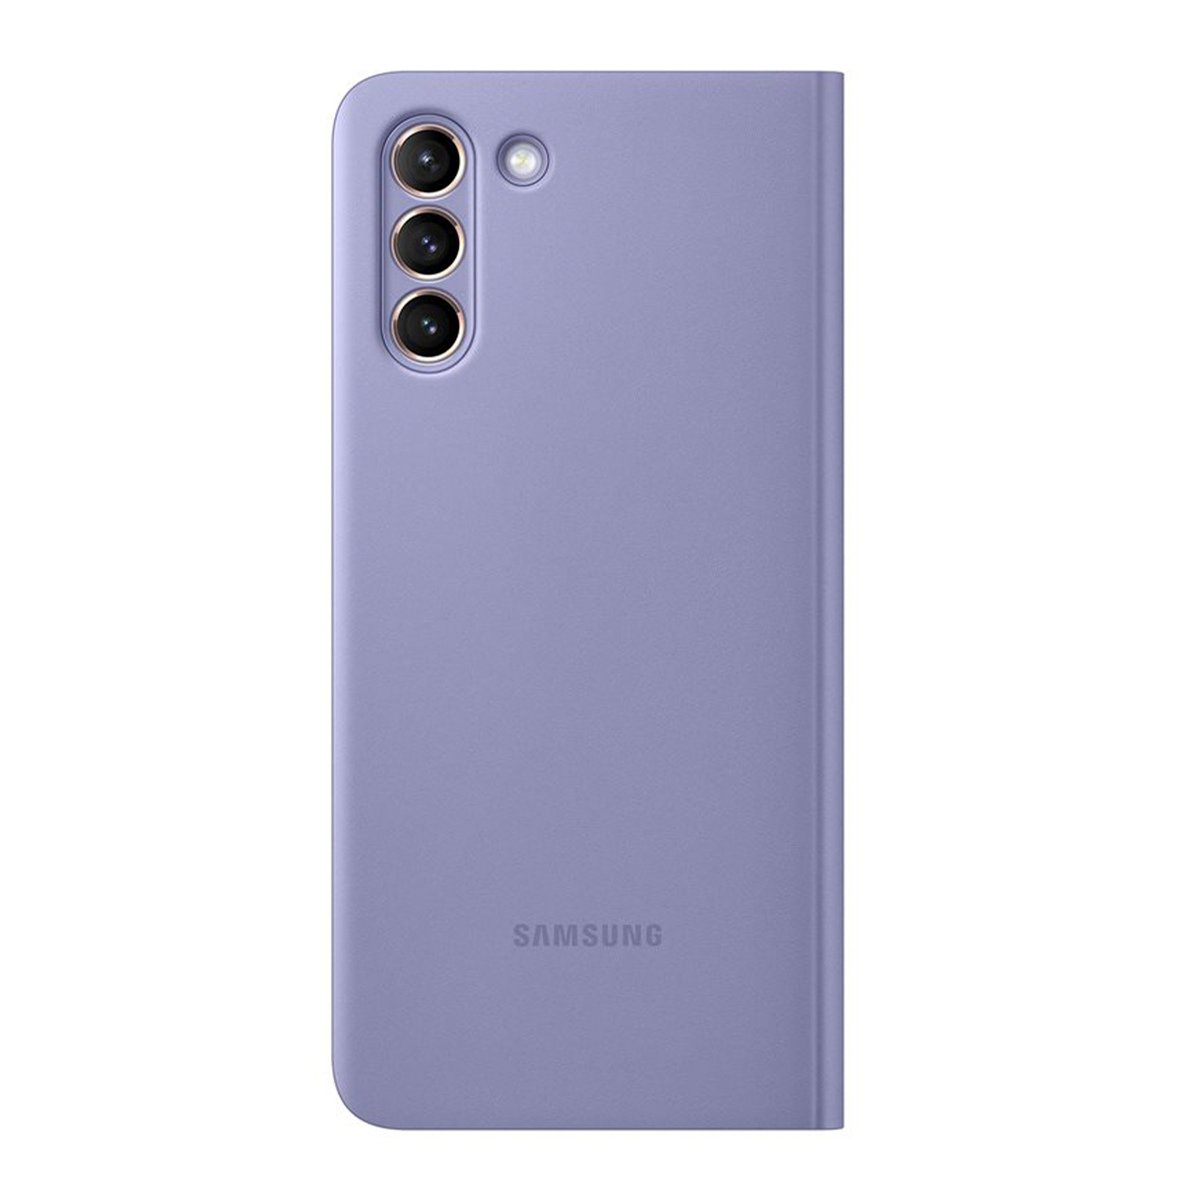 Samsung Galaxy S21+ Book-Cover Smart Clear View Cover ZG996 Violet